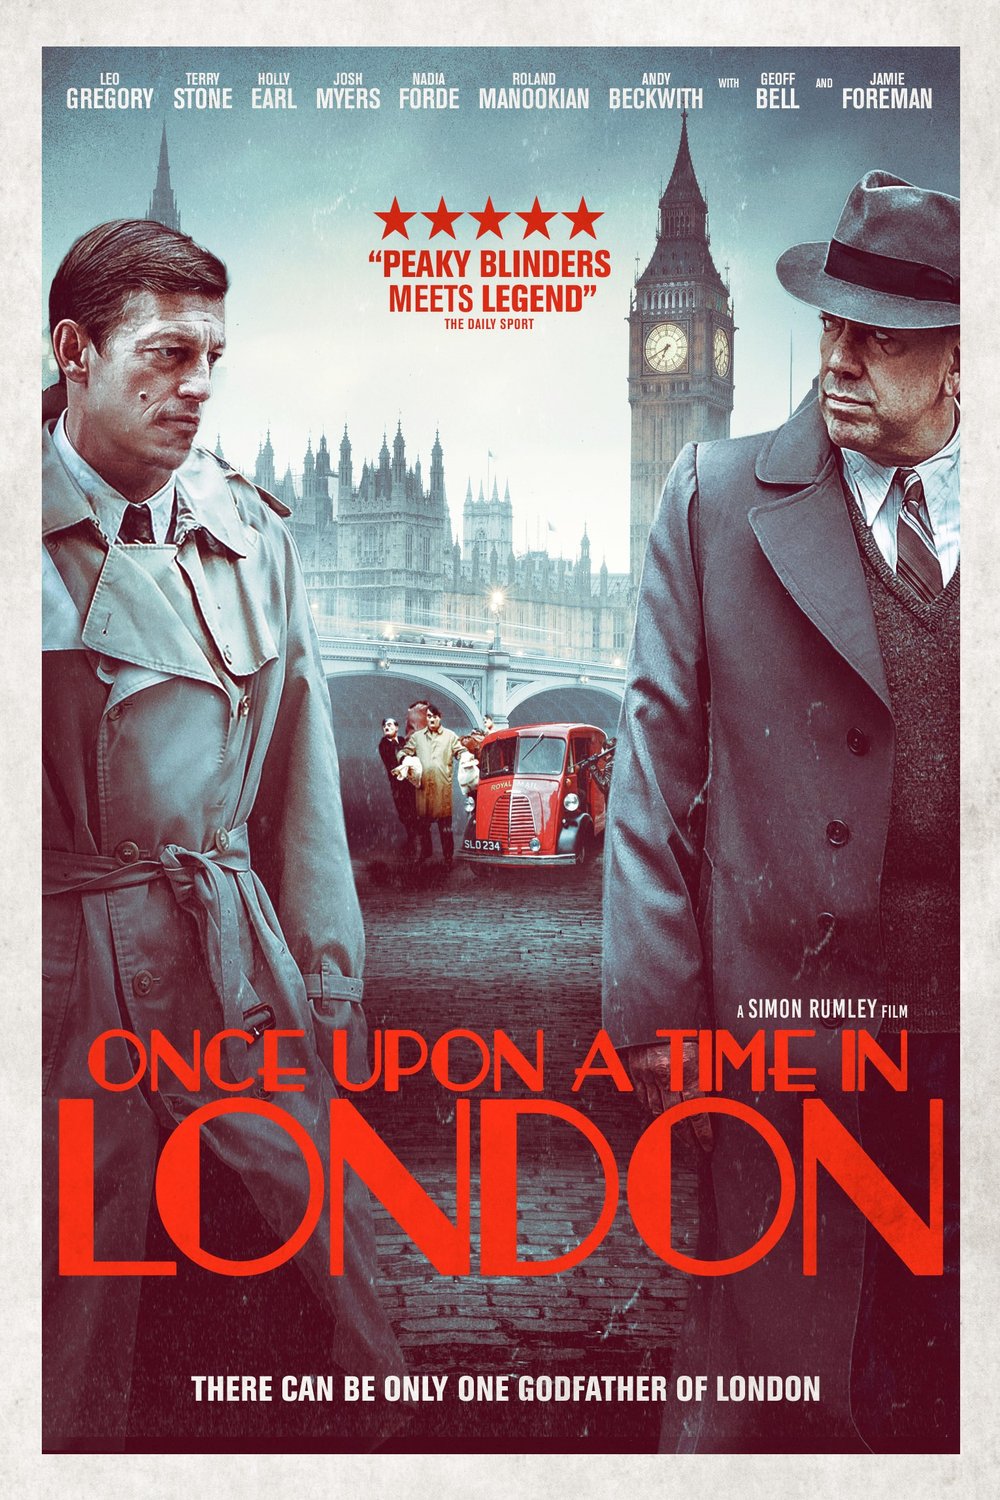 Poster of the movie Once Upon a Time in London